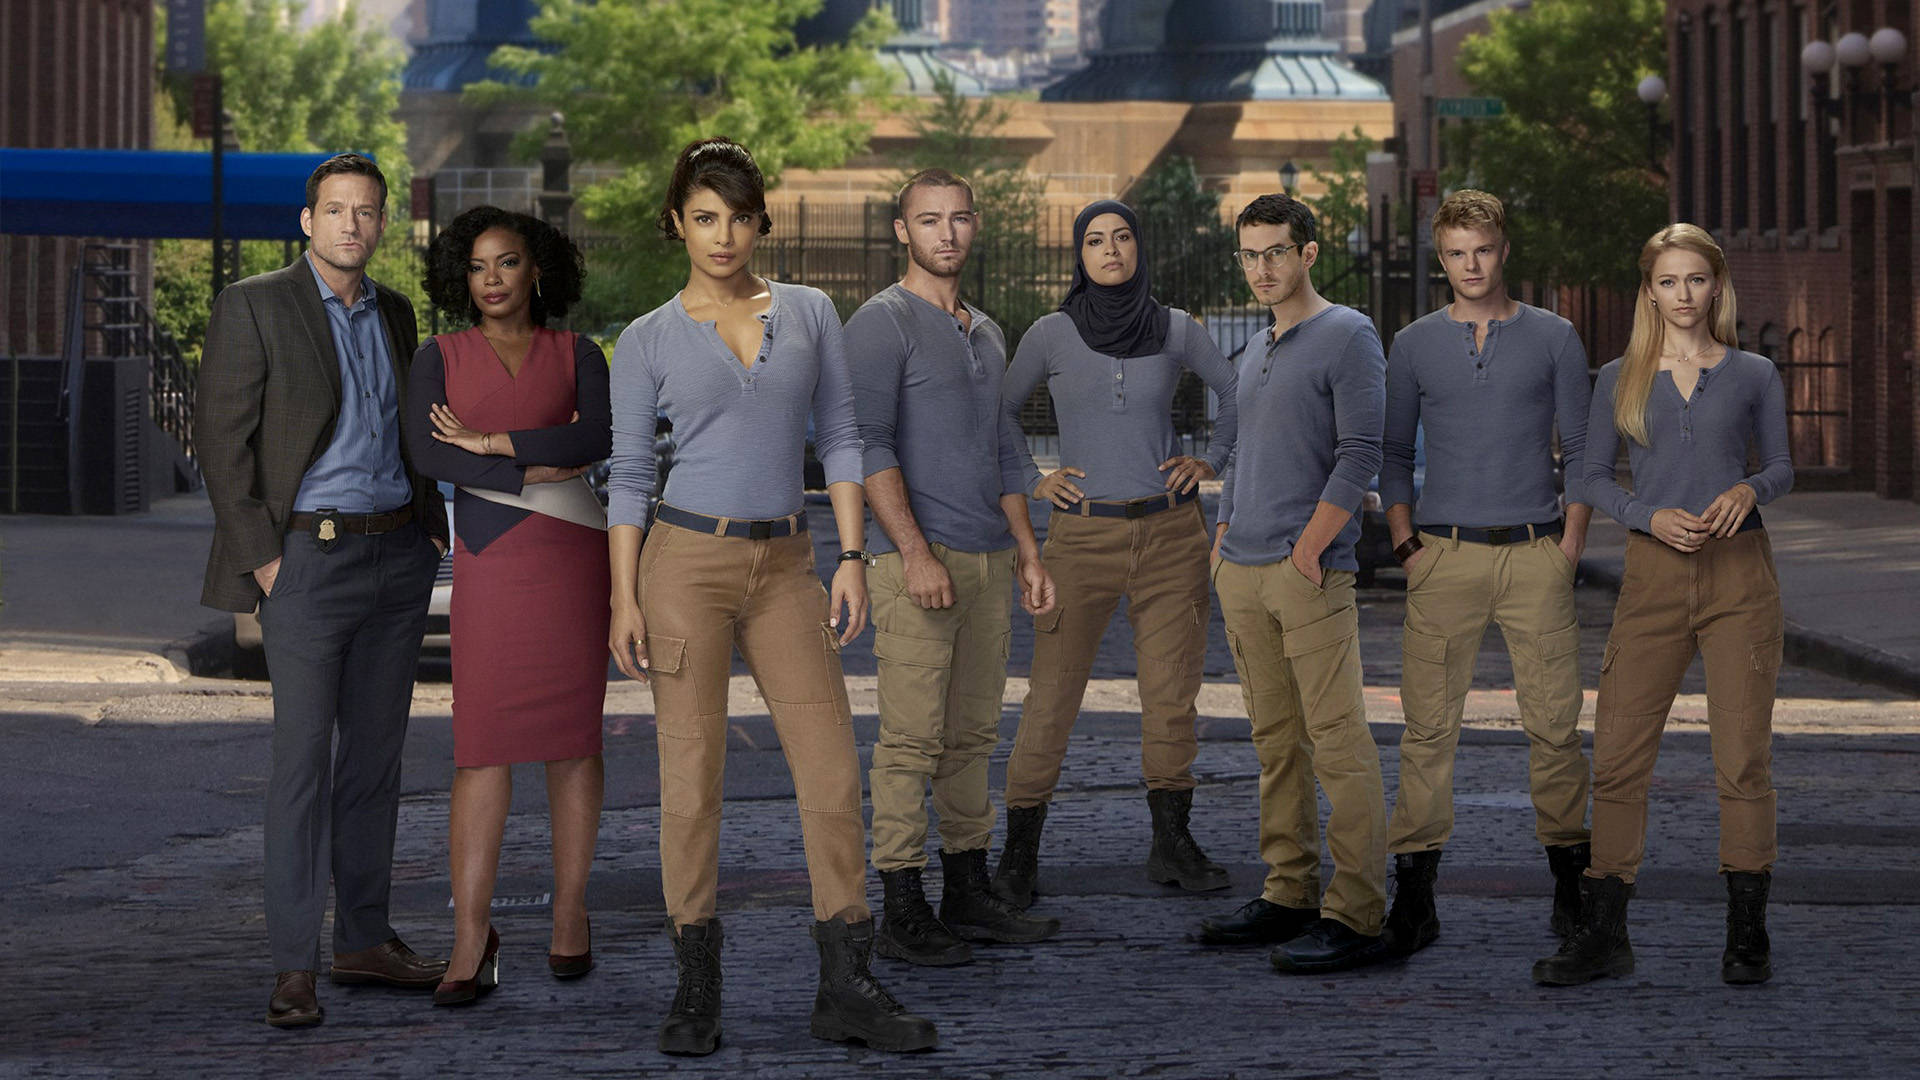 Quantico TV Series Characters Posing in the Foreground of FBI Academy Wallpaper